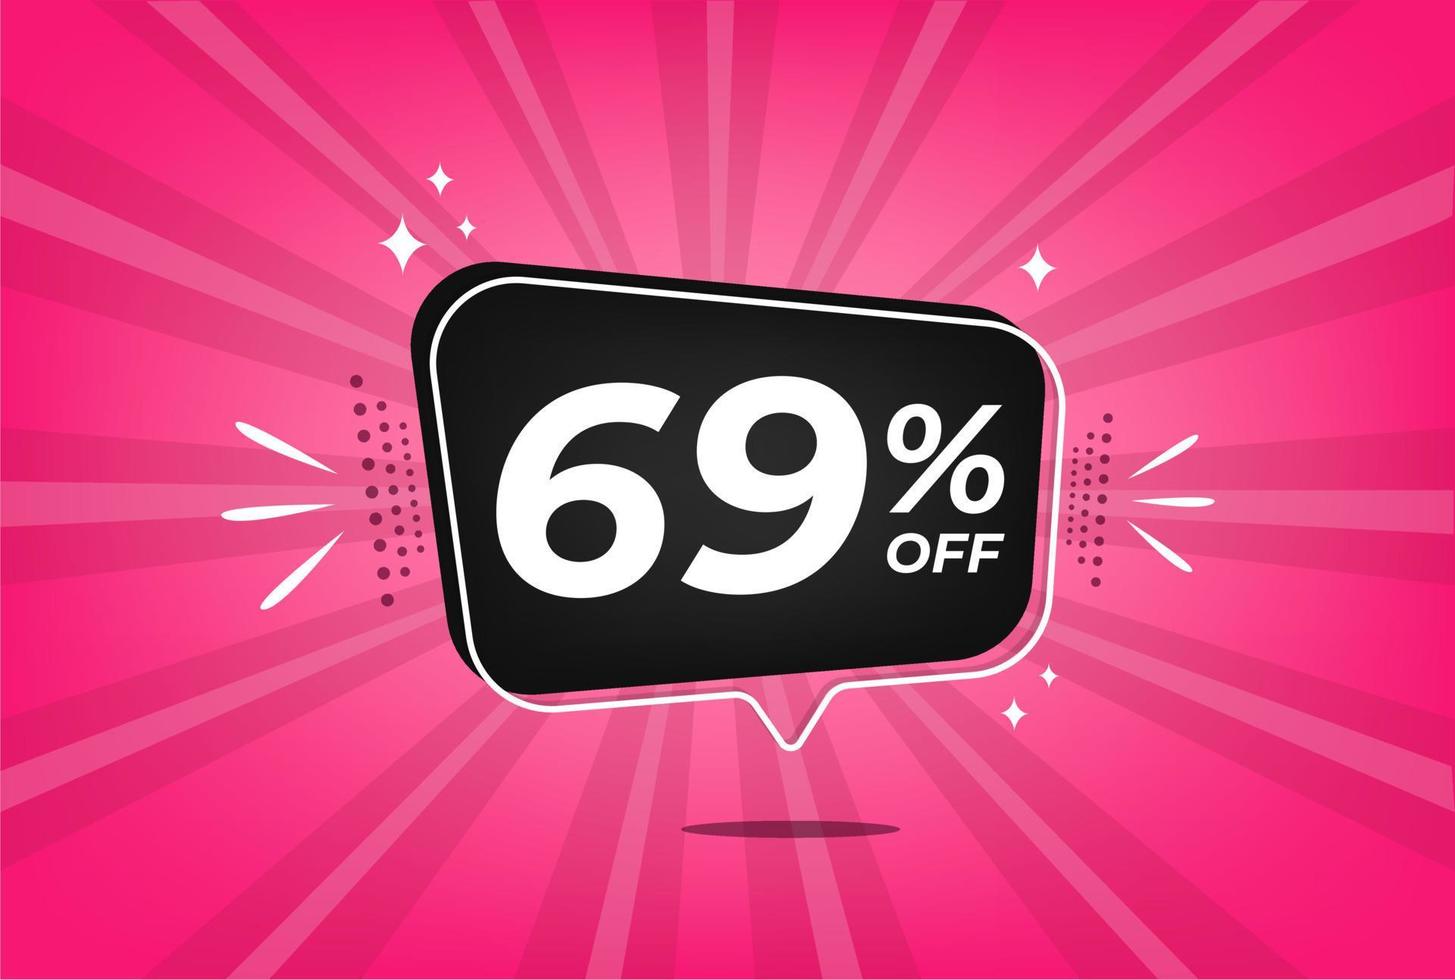 69 percent discount. Pink banner with floating balloon for promotions and offers. vector